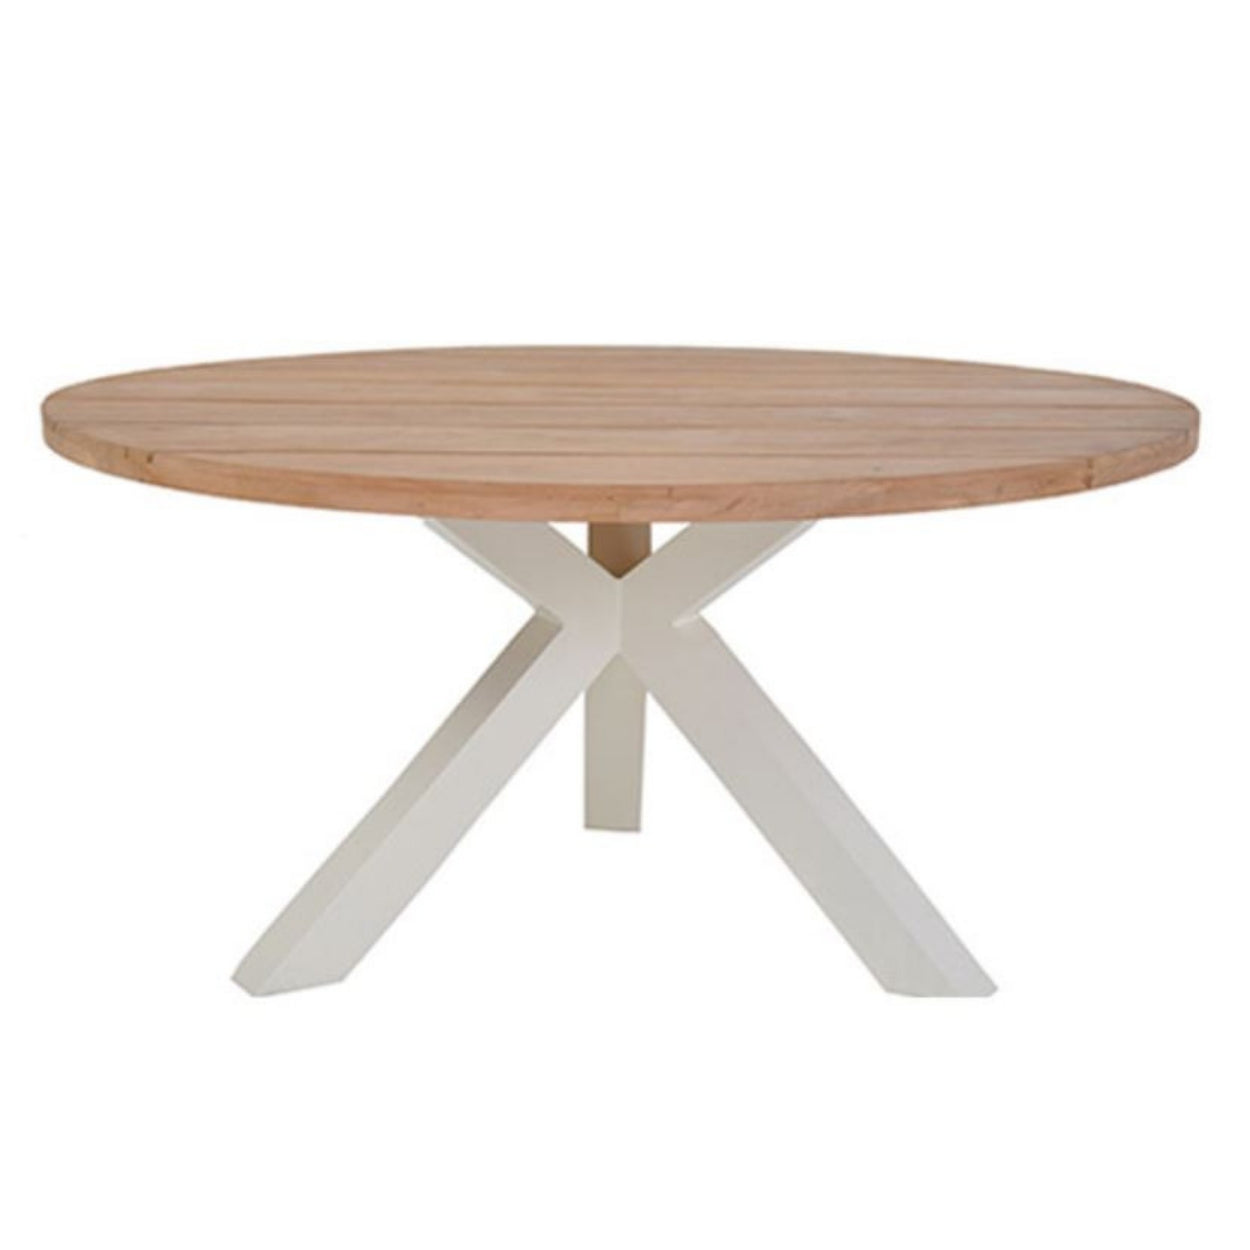 Beauville dining table made superior materials.